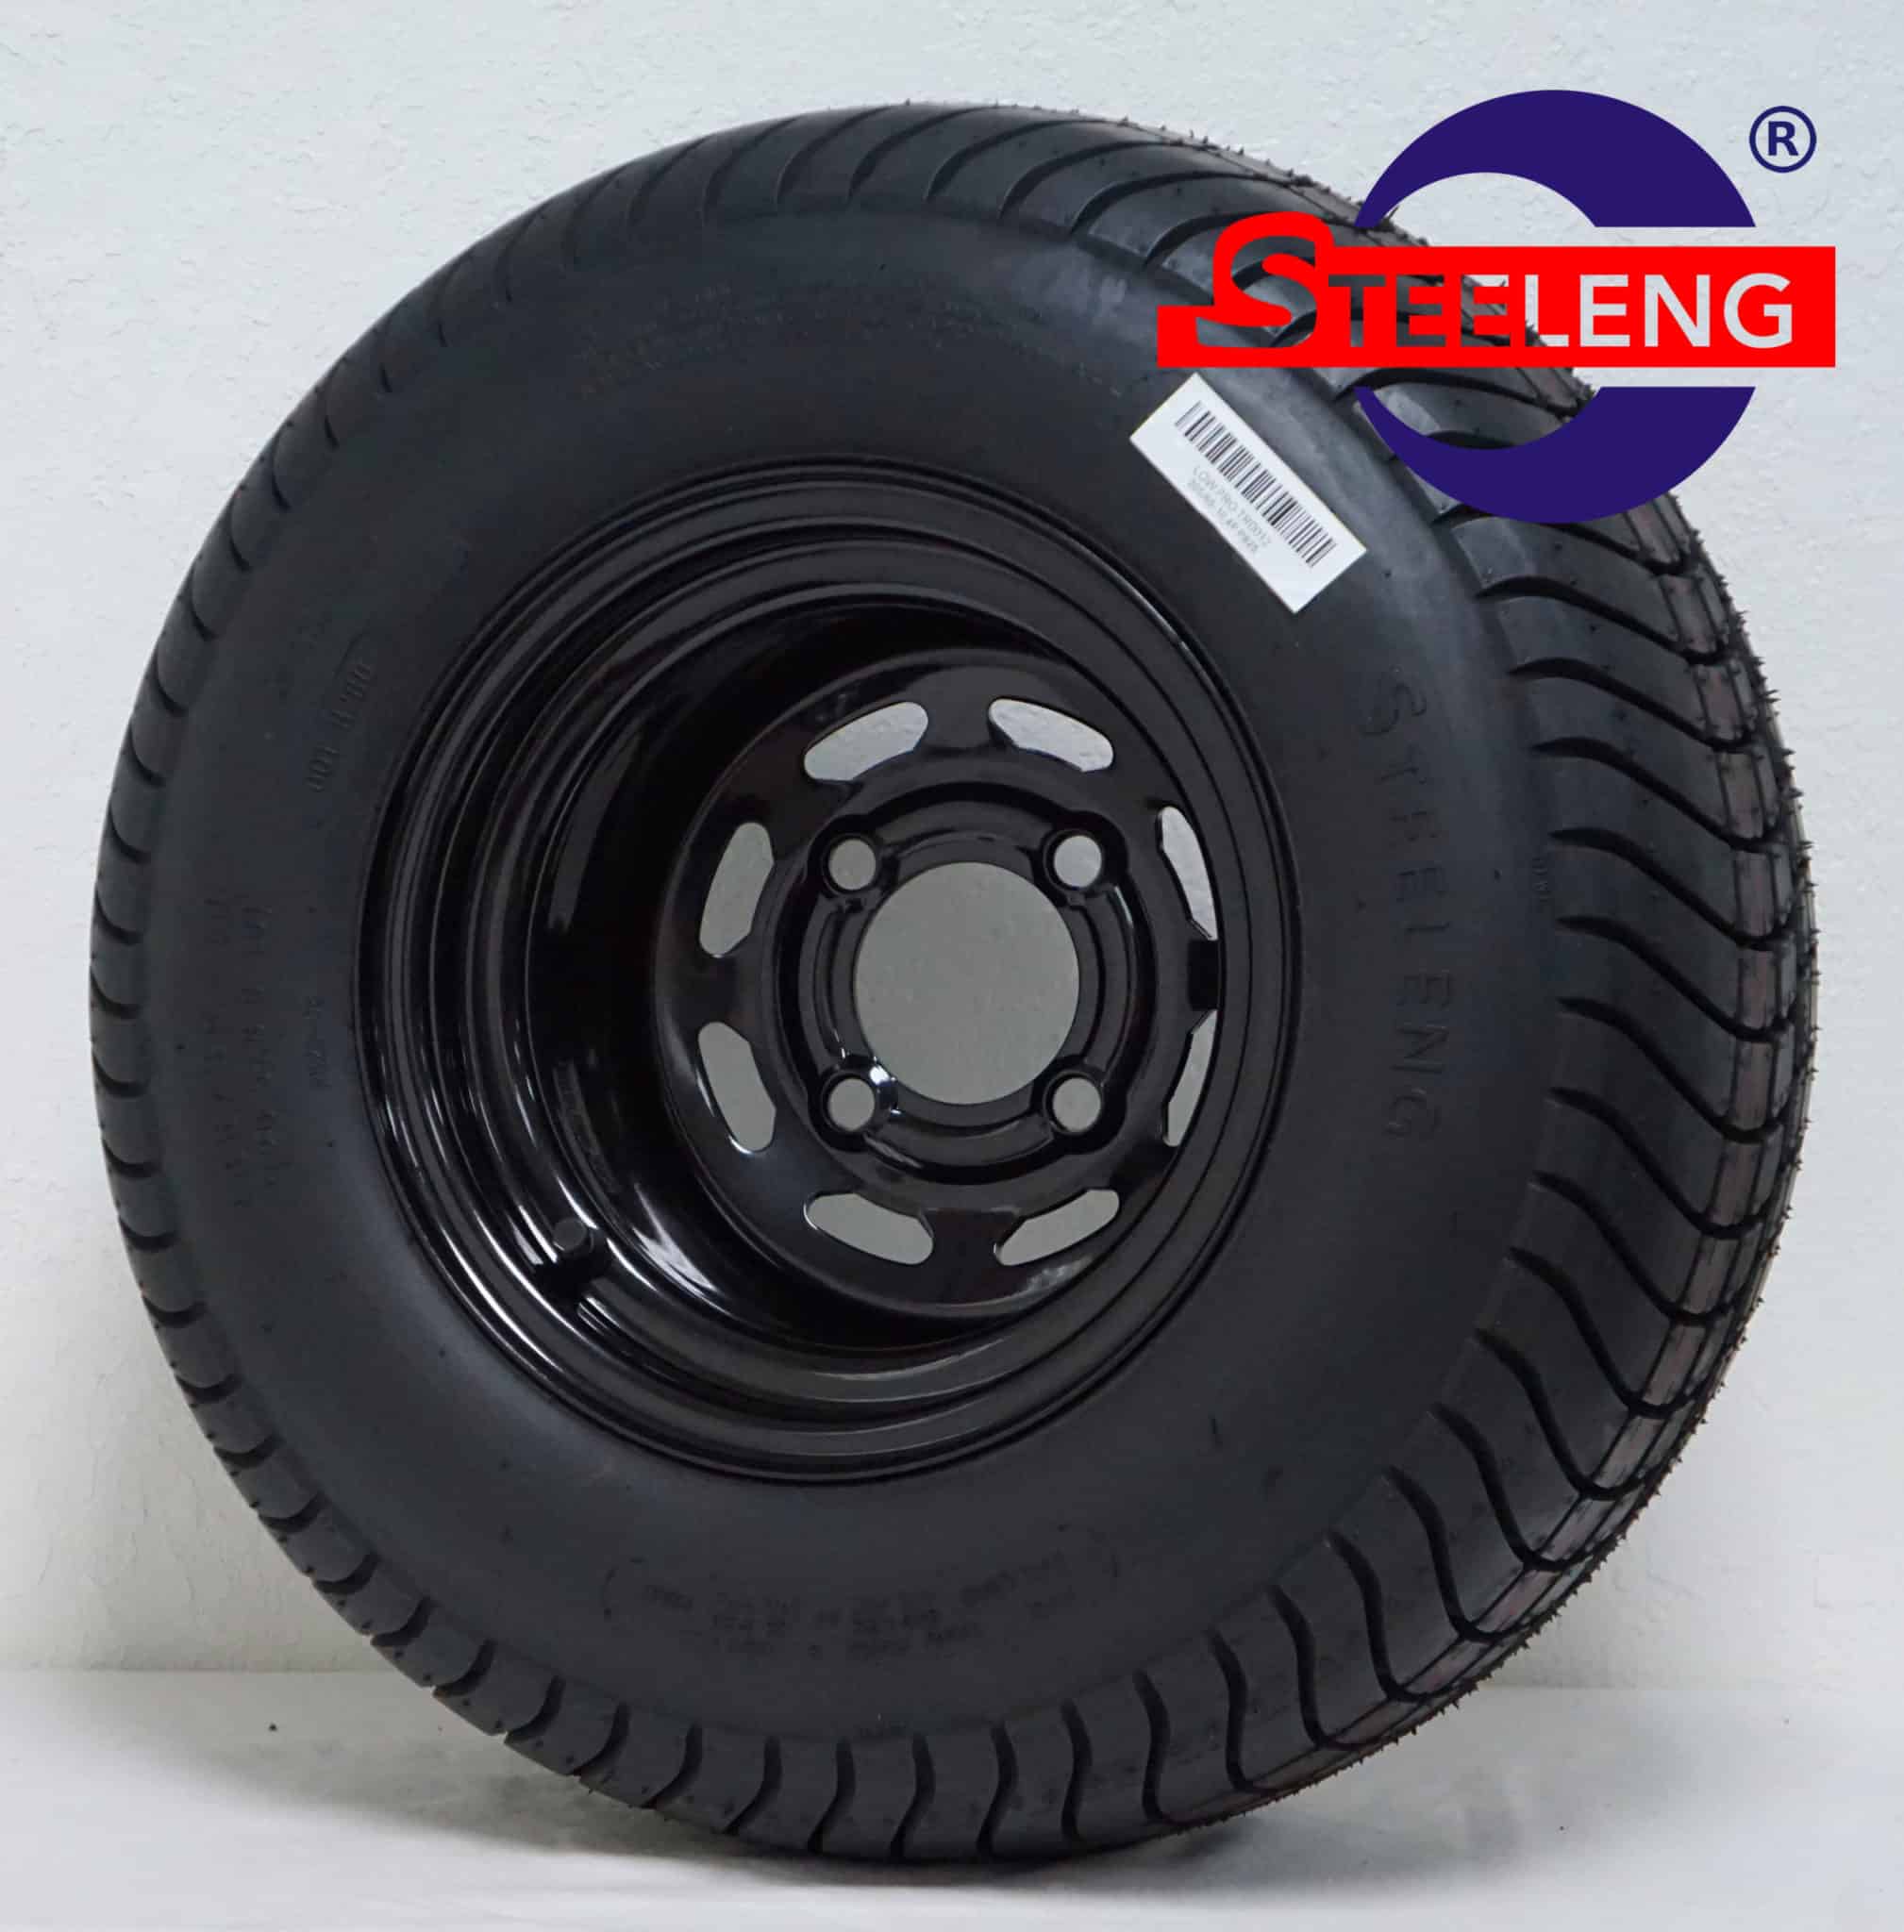 10" Black Slotted Steel Wheel & 205/65-10 Comfort Ride Street Tire DOT Approved